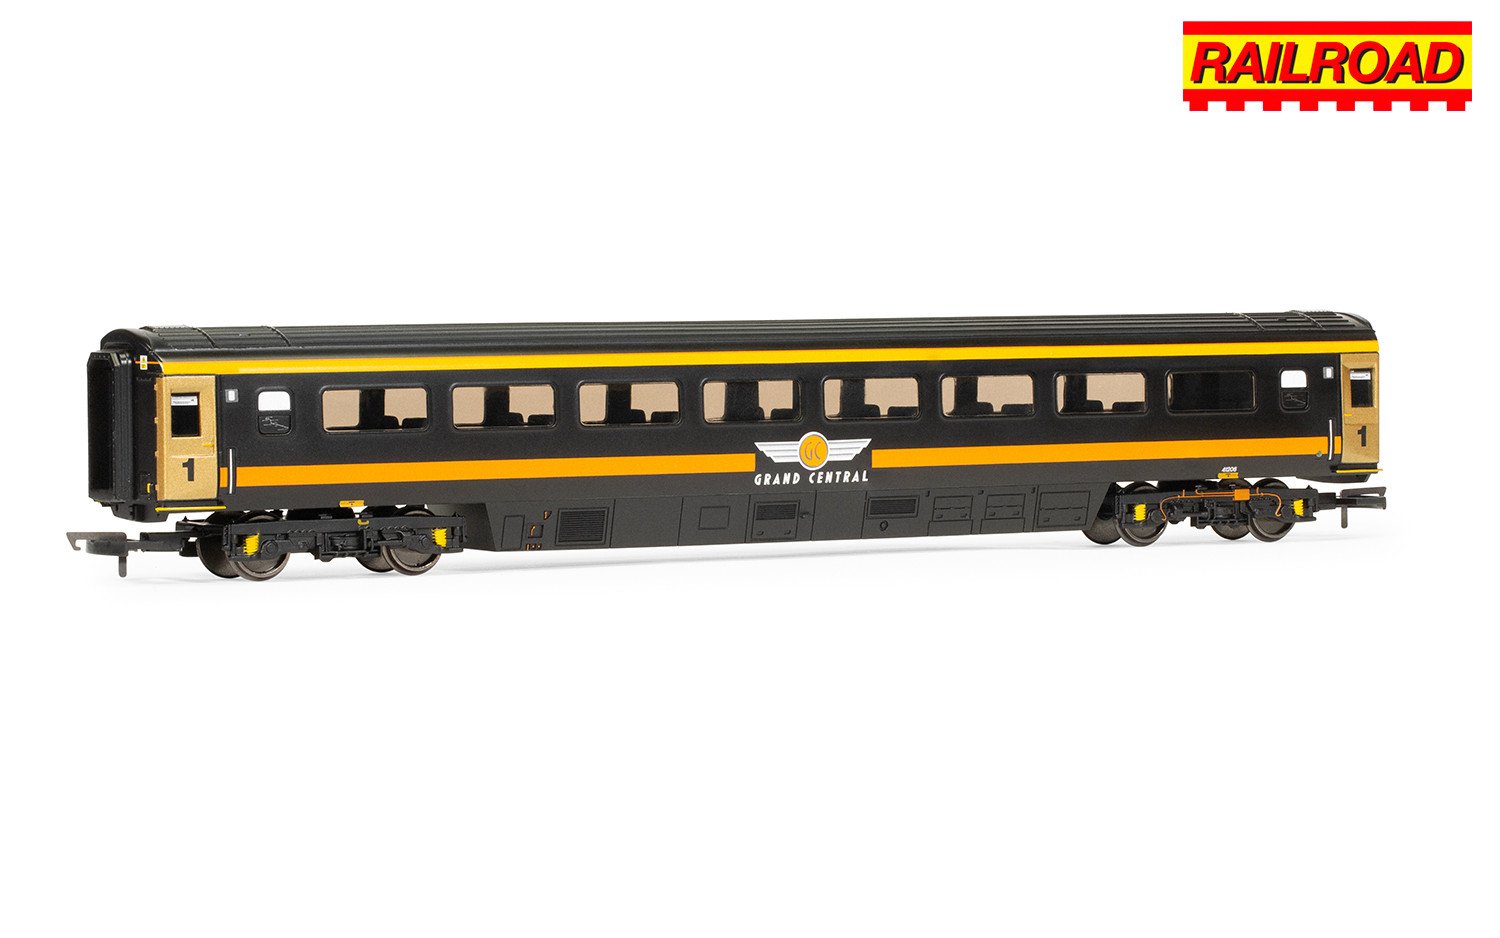 A full compliment of Grand Central liveried Mk3 coaches are set to join the two power cars.